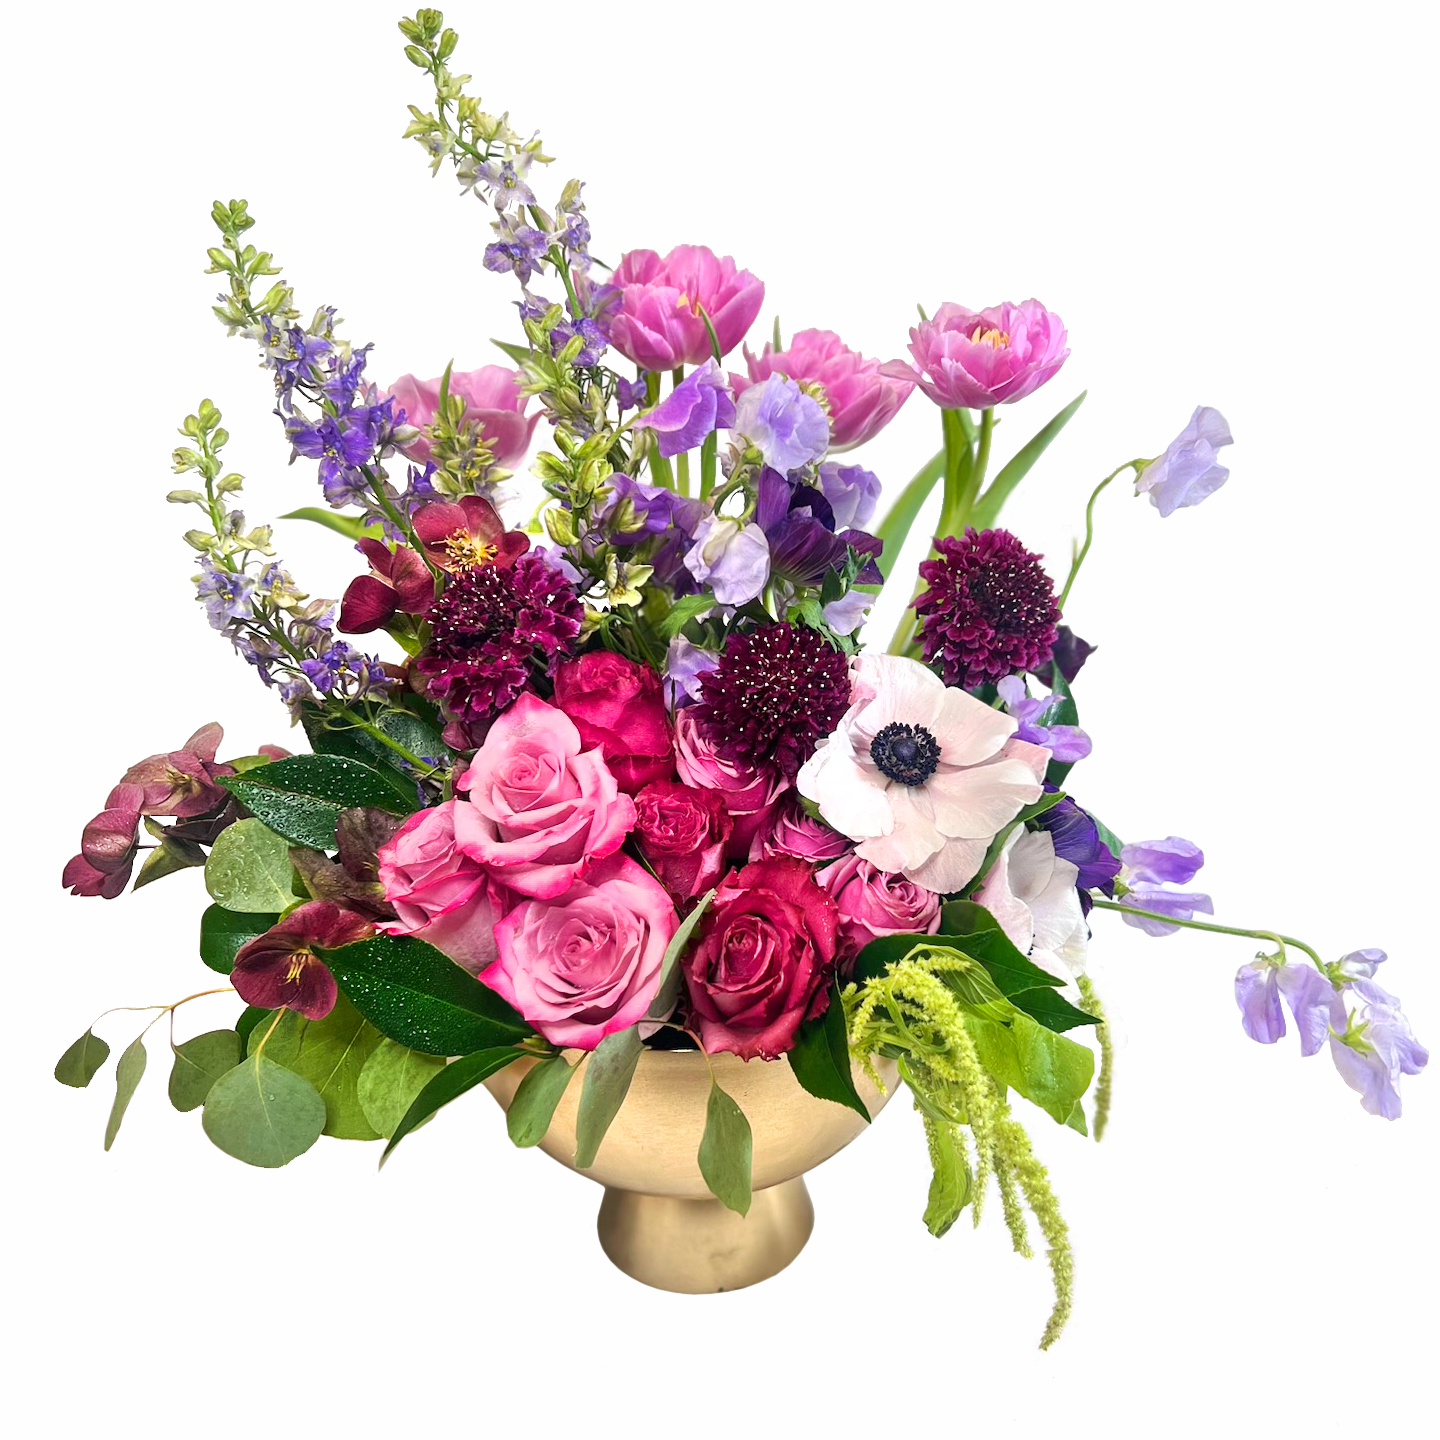 The Color Purple, Stems at the Palatine - RSVP Style